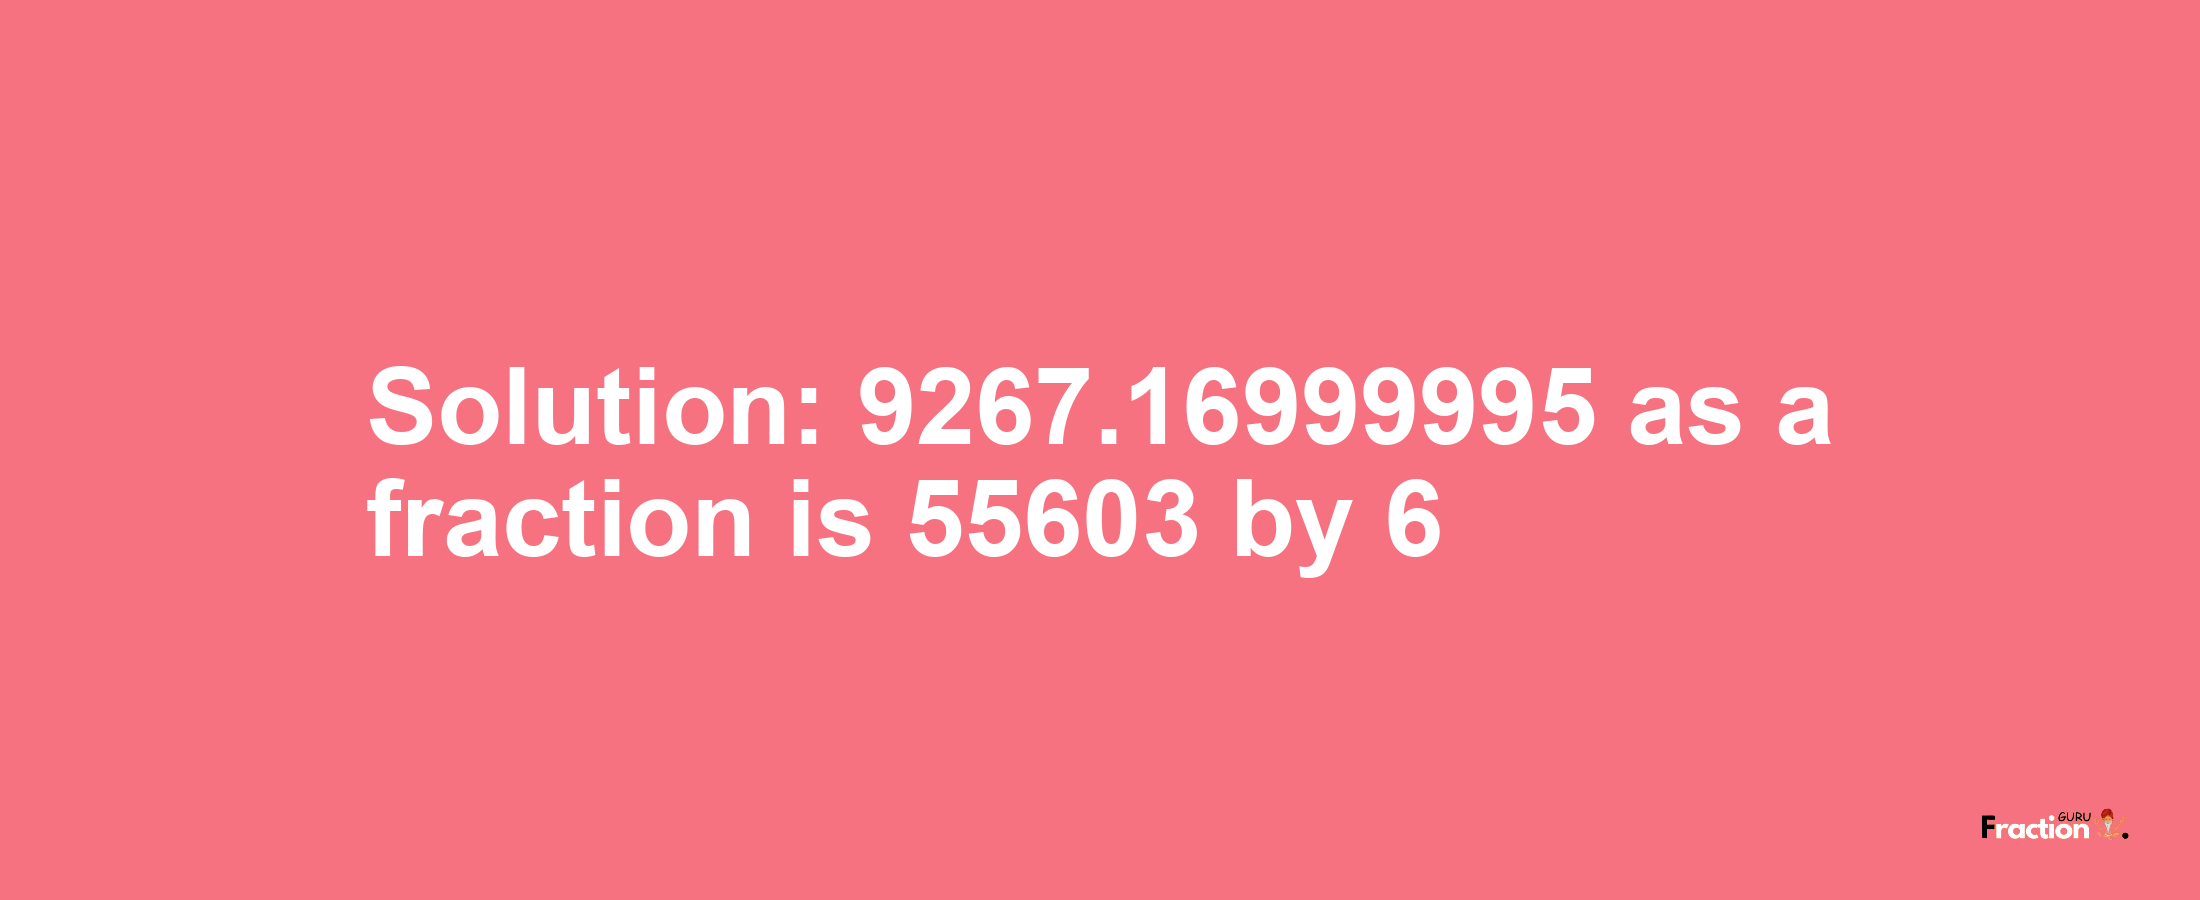 Solution:9267.16999995 as a fraction is 55603/6